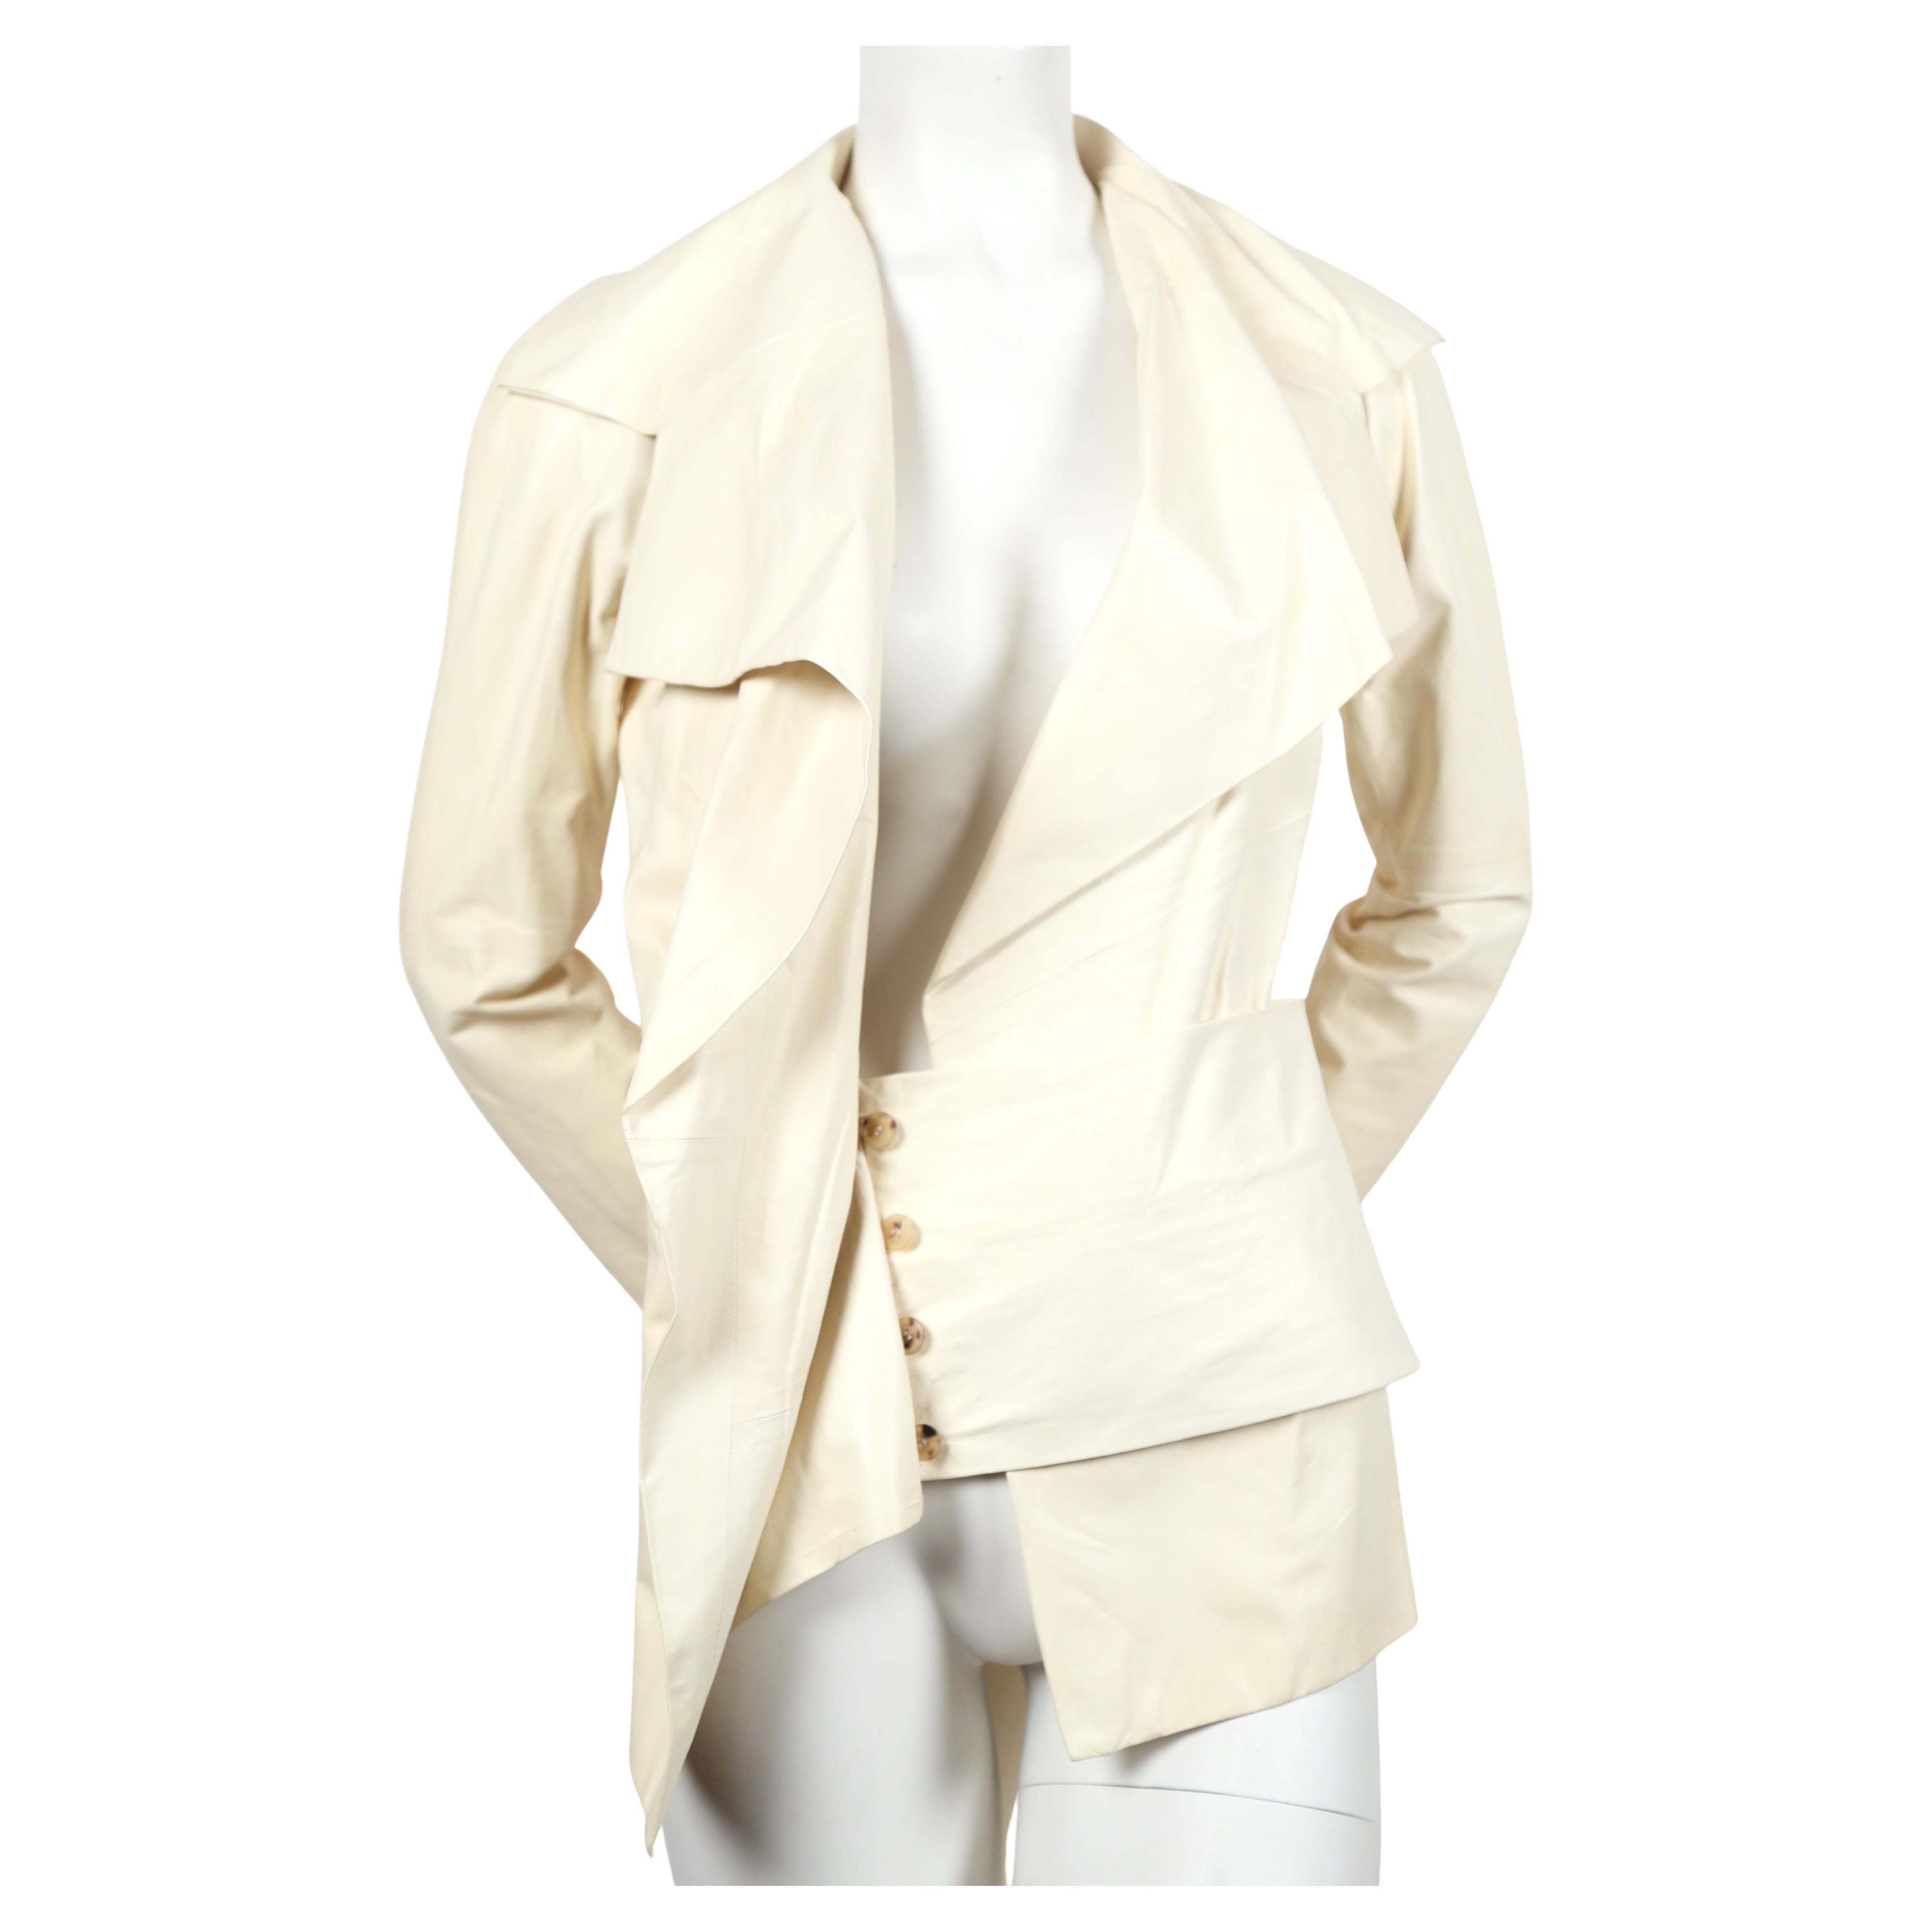 Off-white lambskin leather jacket with unique wrap closure designed by Tom Ford for Yves Saint Laurent spring 2004 exactly as seen on the runway. Belt can be worn at waist or hips. Jacket is labeled a French size 38 although this also fits a FR 36.